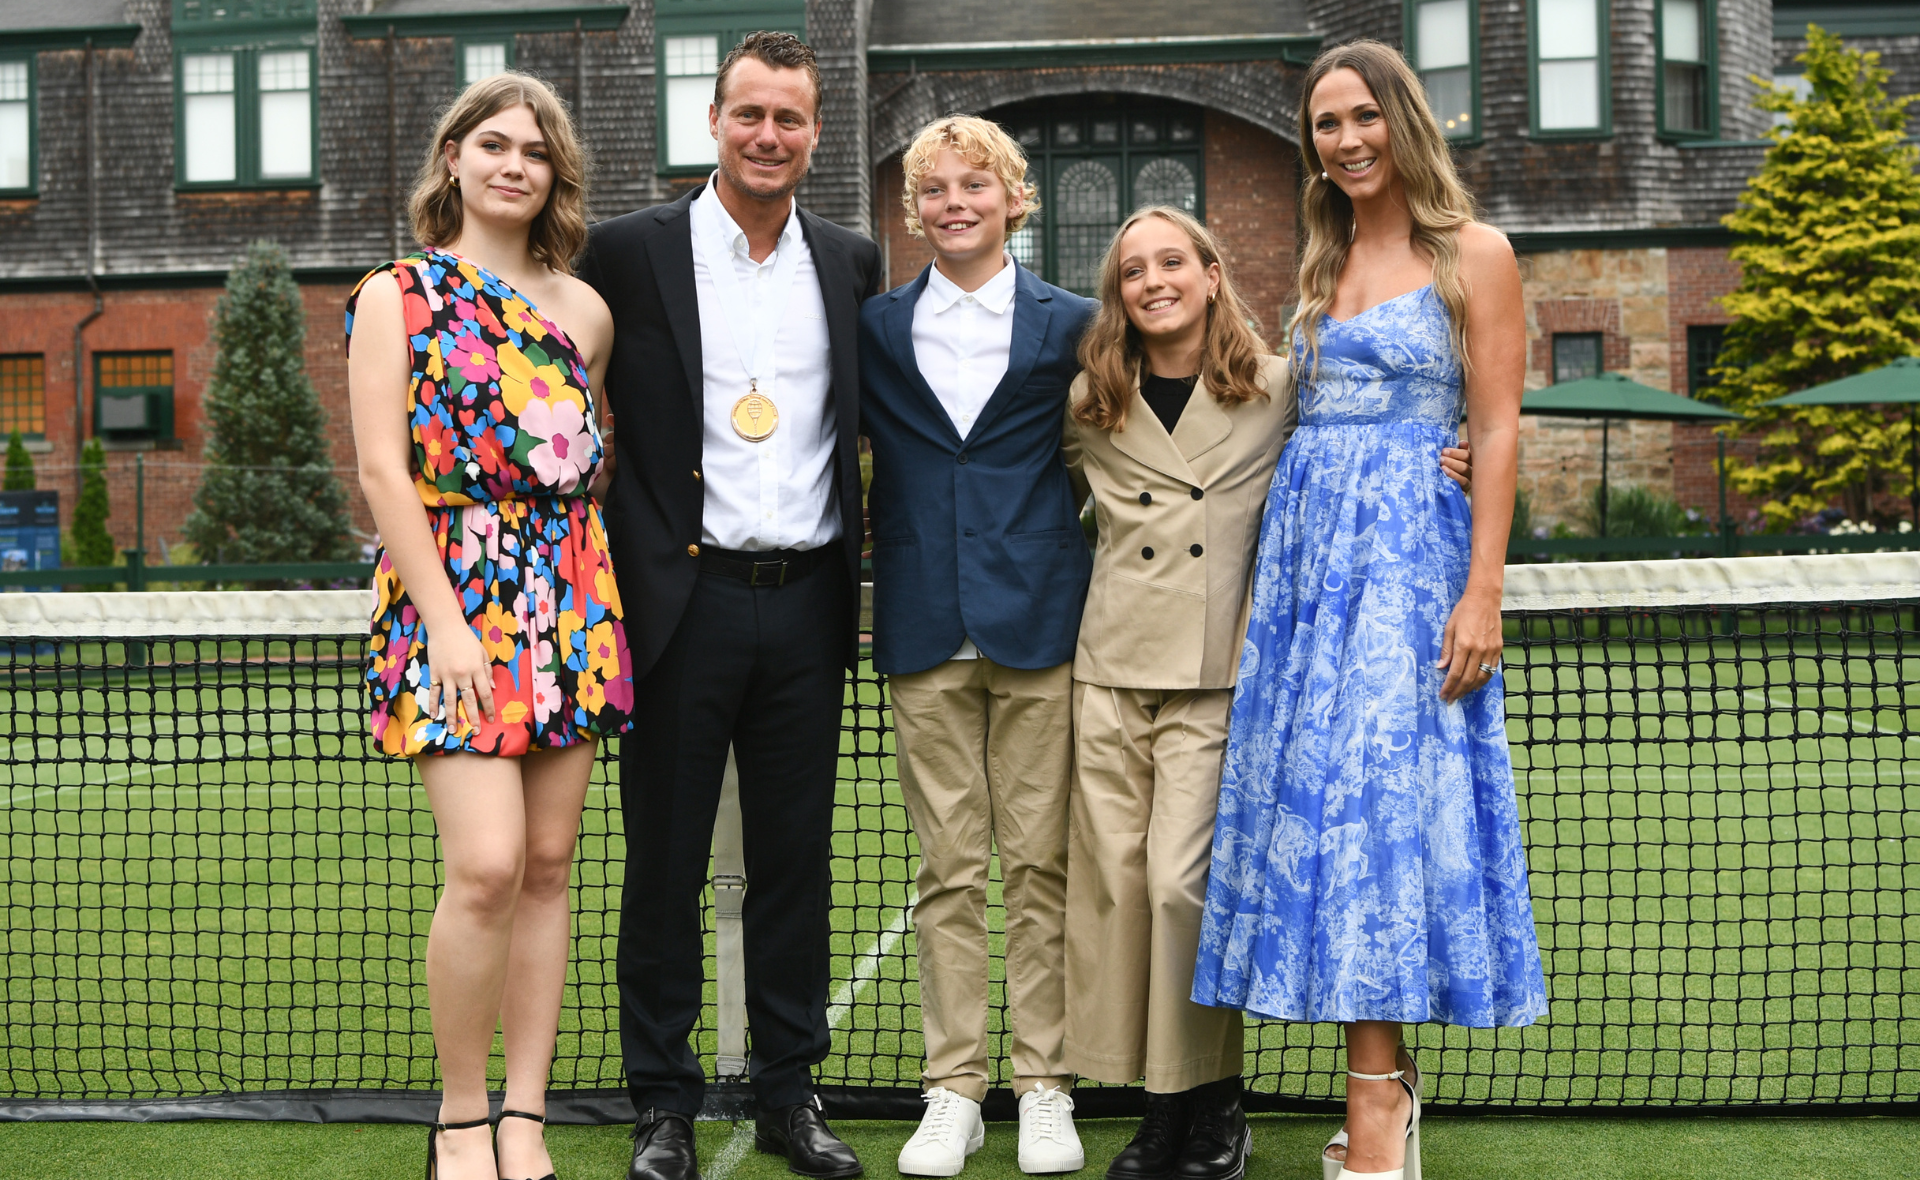 Bec and Lleyton Hewitt reunite with family after alleged feud